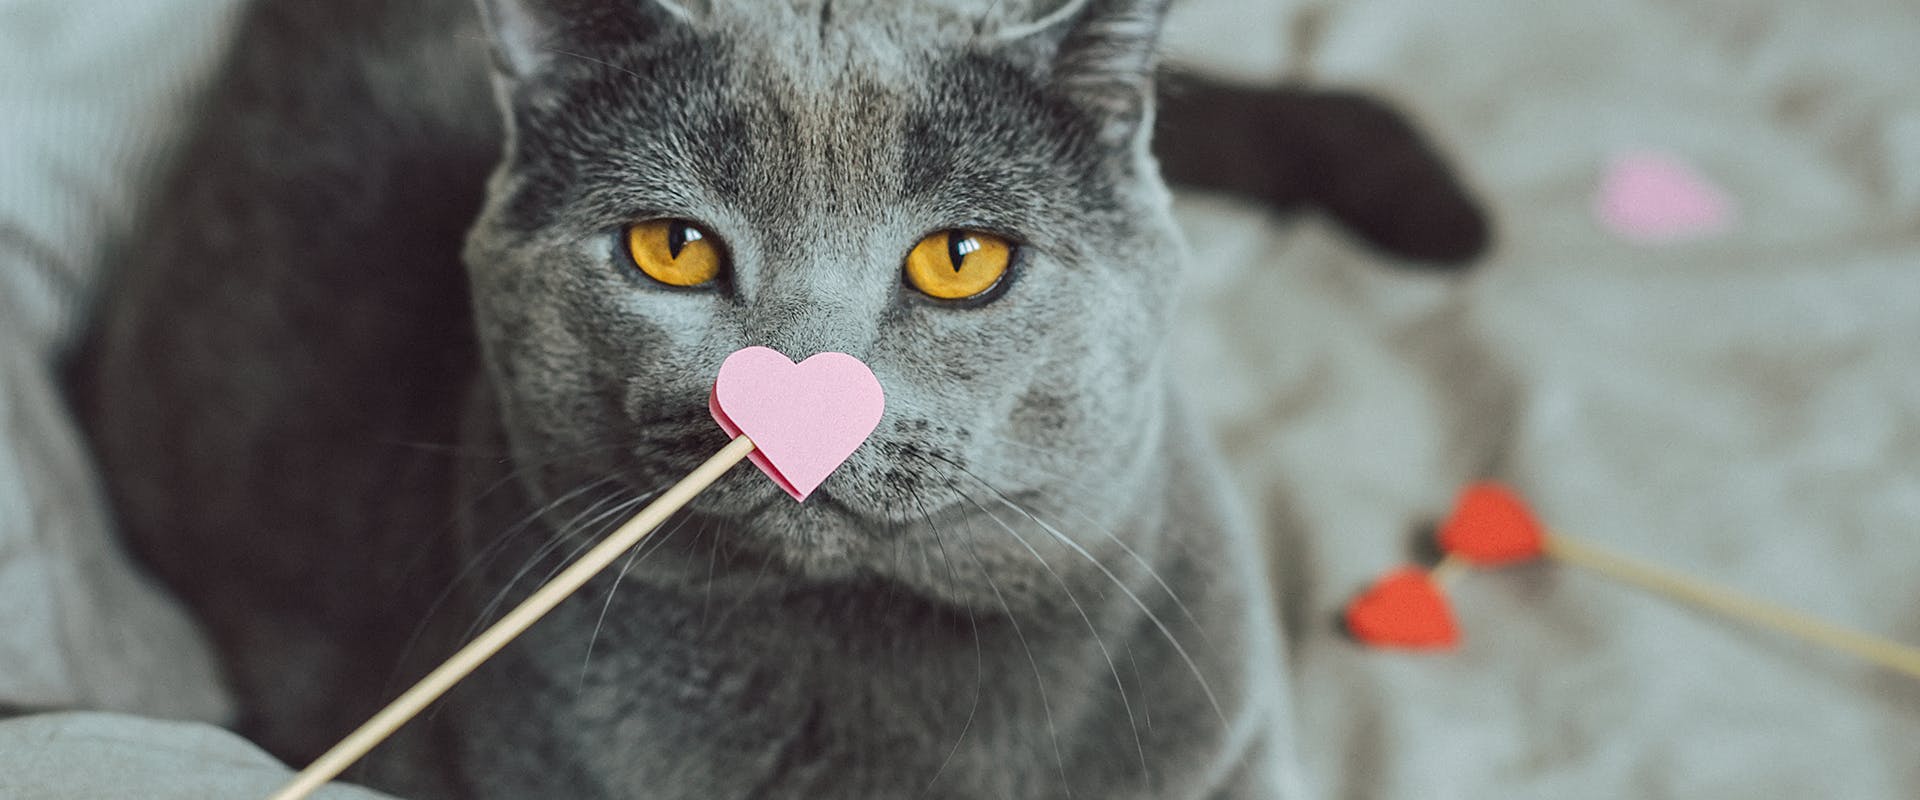 A person holding a paper heart on a stick in front of a gray cat's face